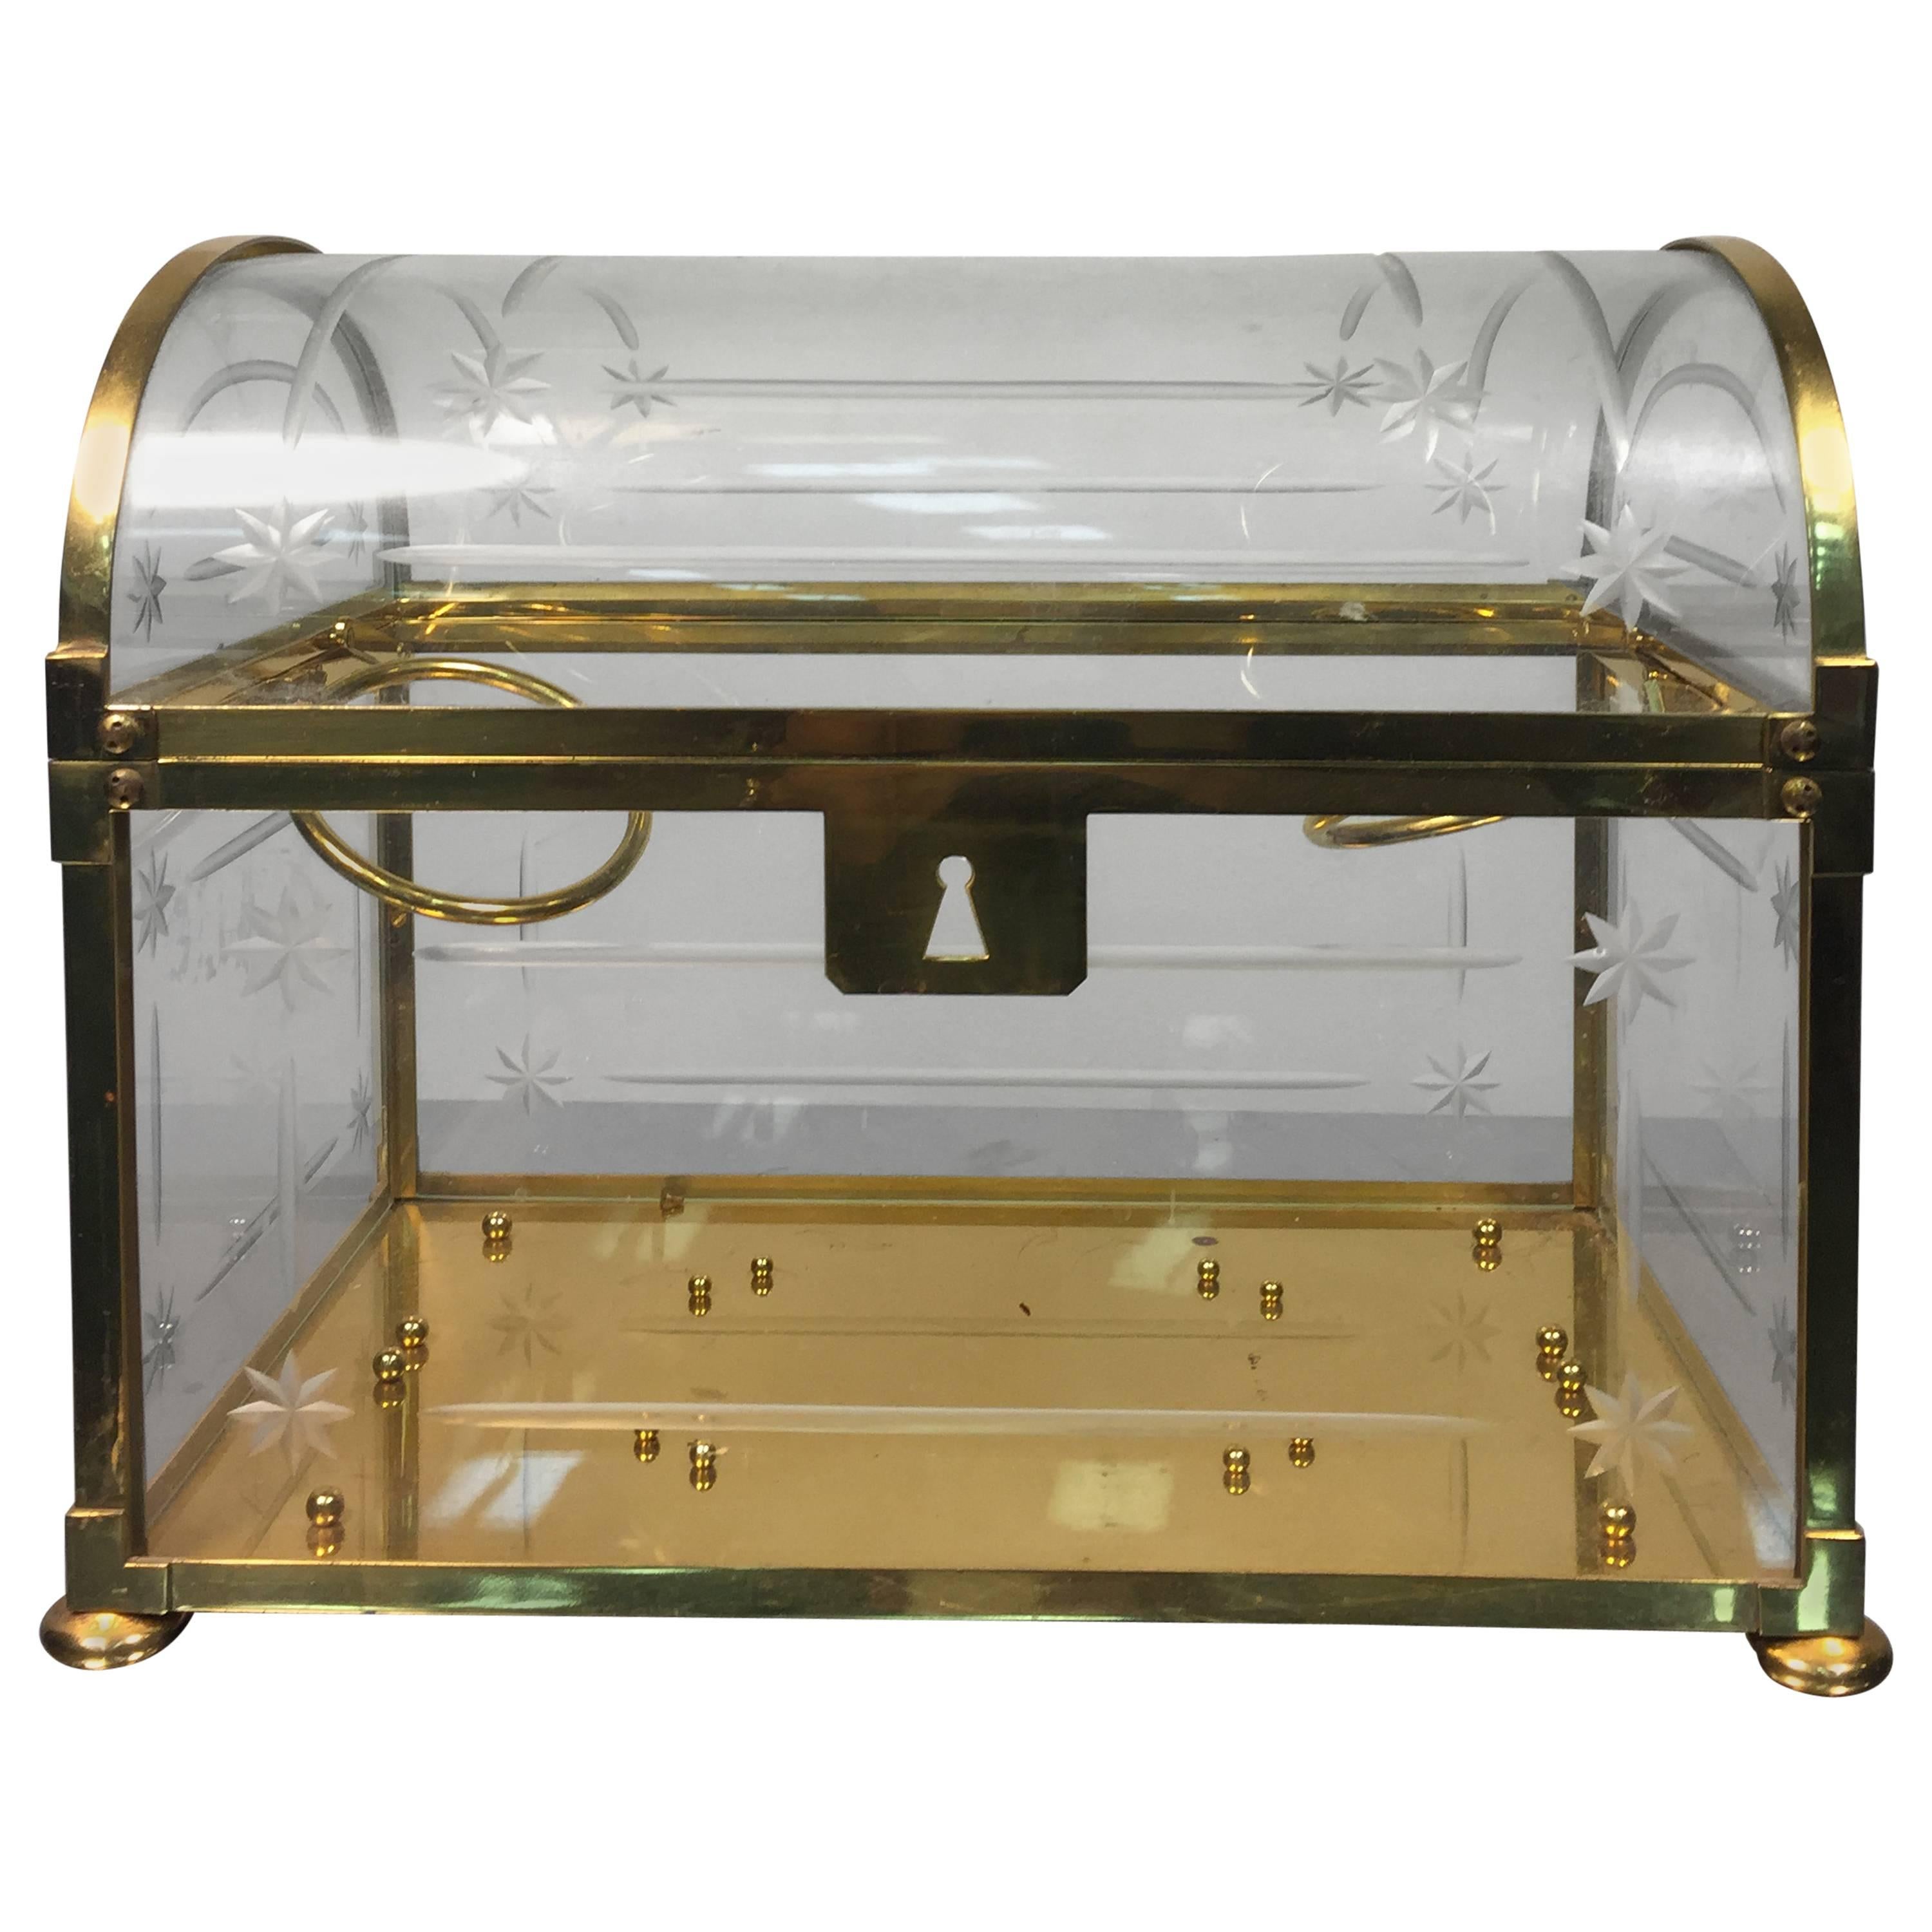 Beautiful Modern Italian Brass and Glass Box in the Manner of Gucci For Sale